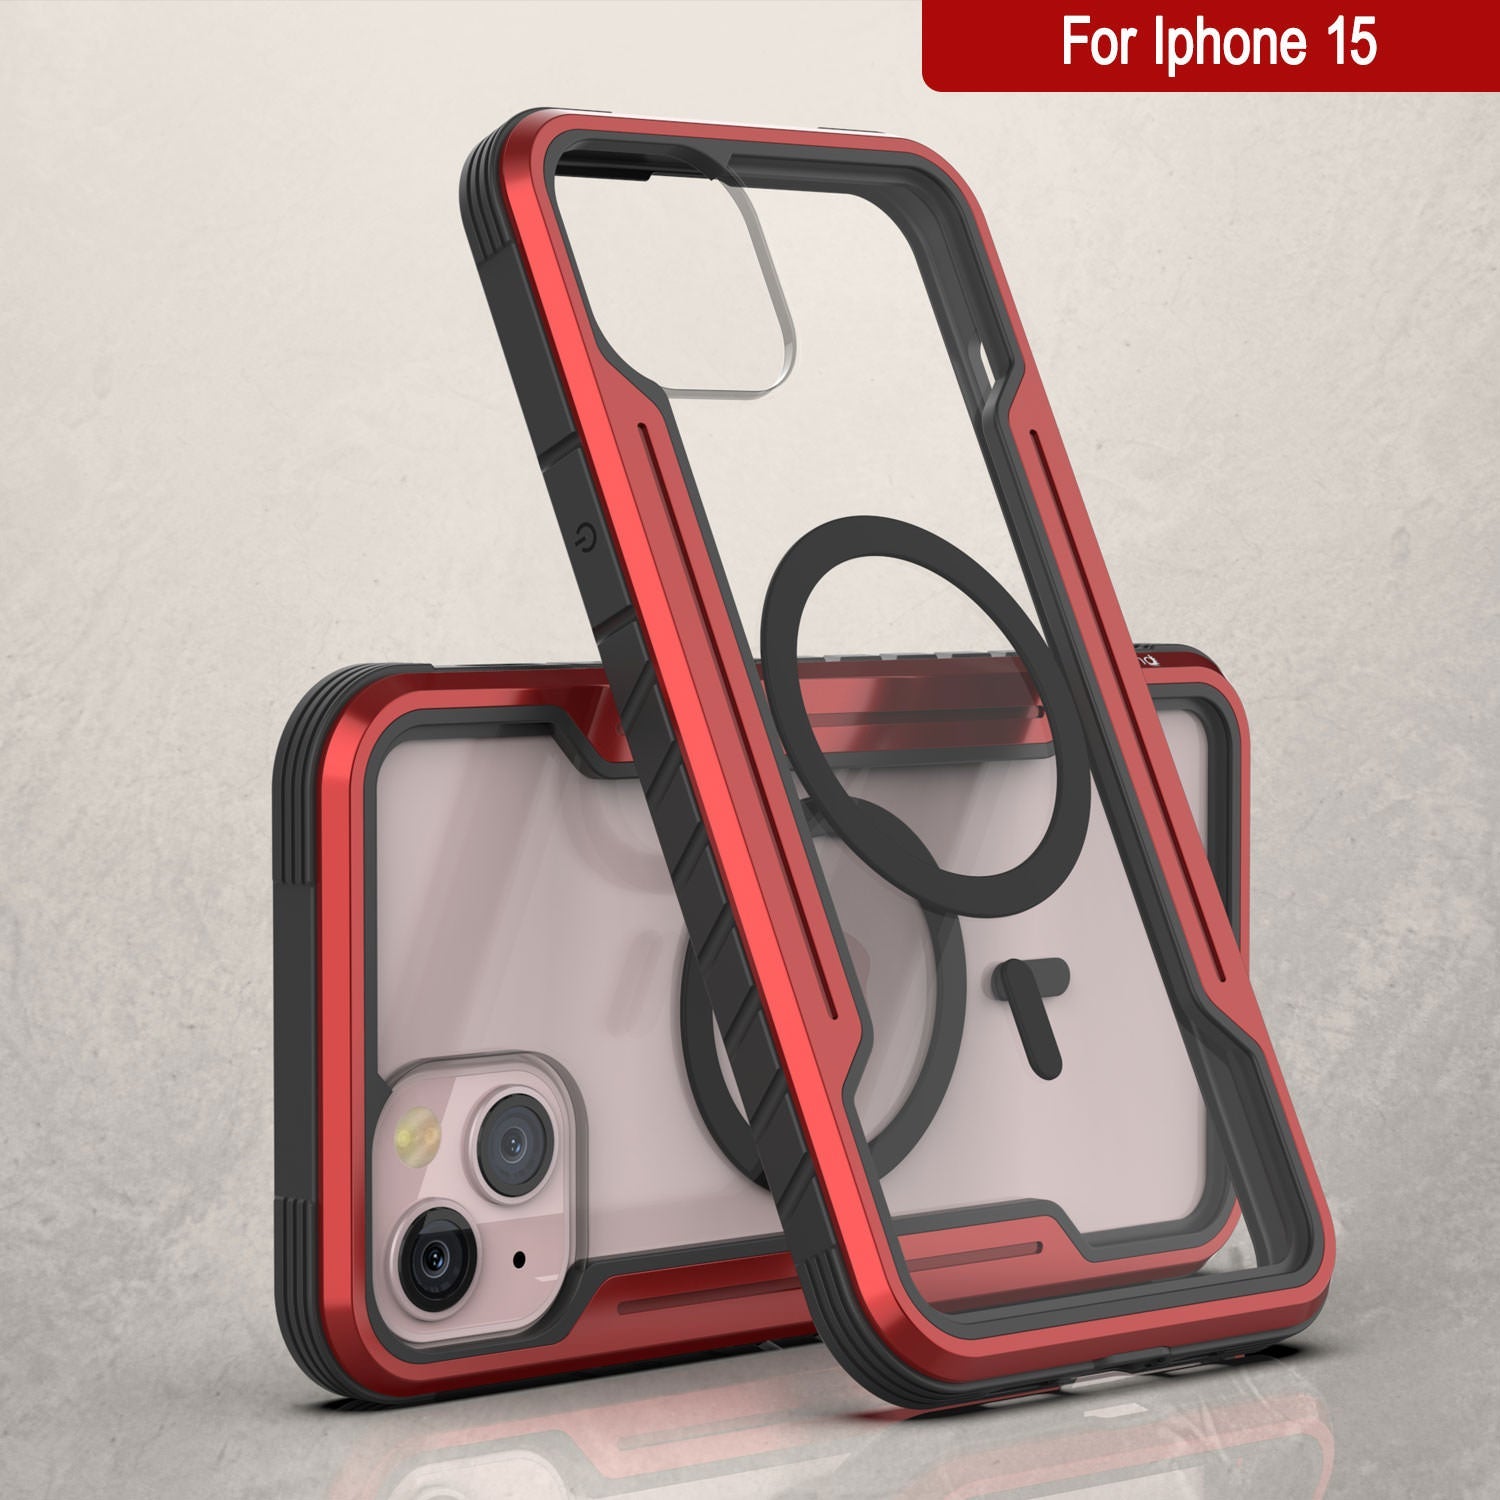 Punkcase iPhone 15 Armor Stealth MAG Defense Case Protective Military Grade Multilayer Cover [Red]